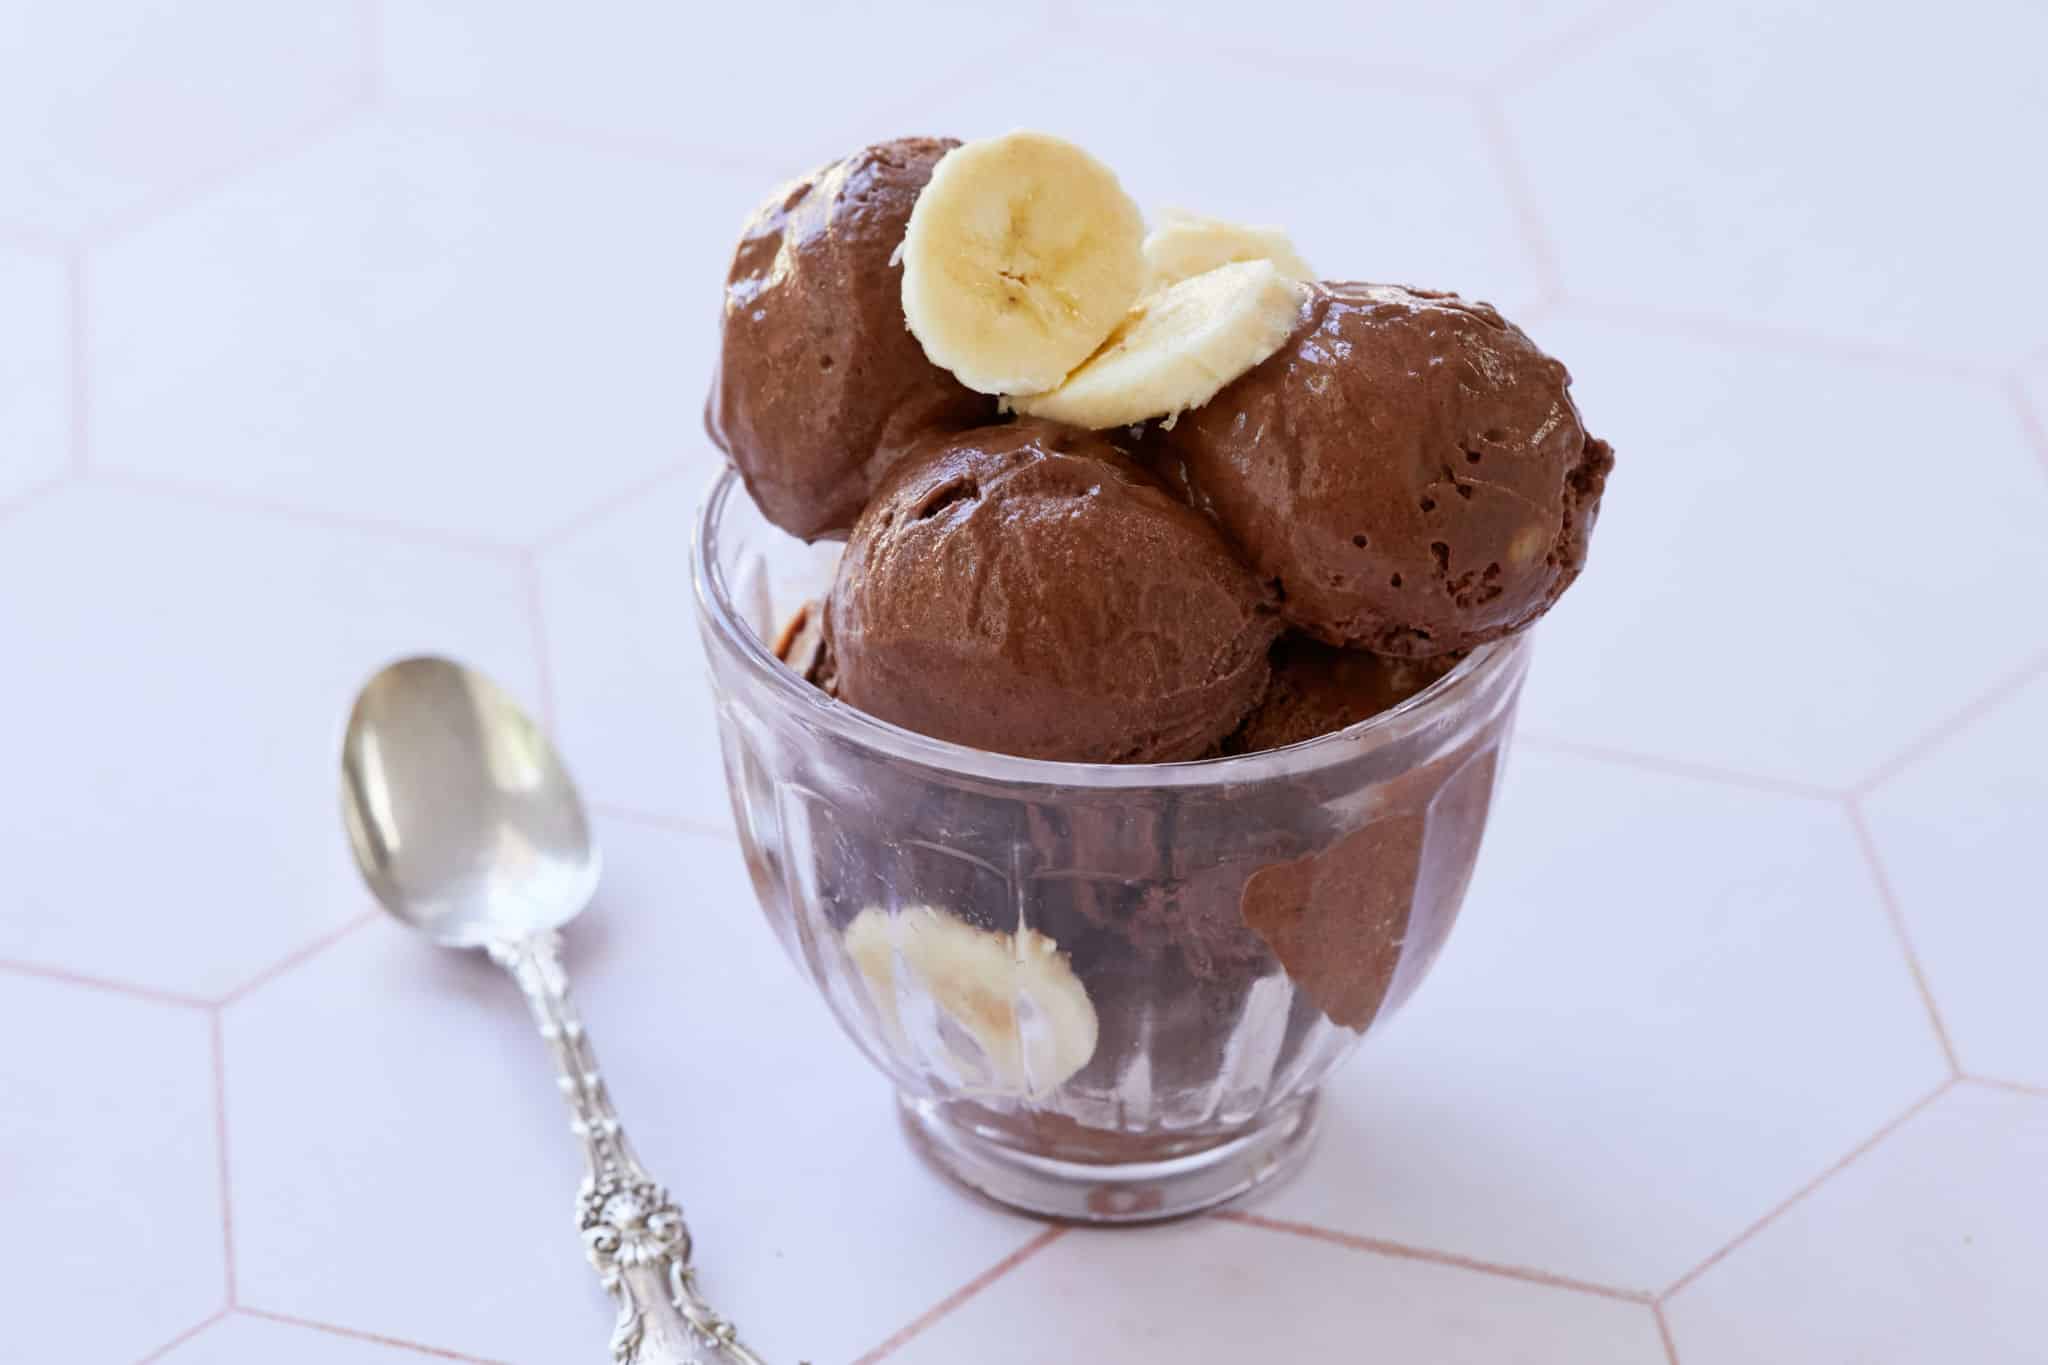 Scoops of chocolate ice cream for breakfast are served in a glass bowl, topped with fresh bananas.